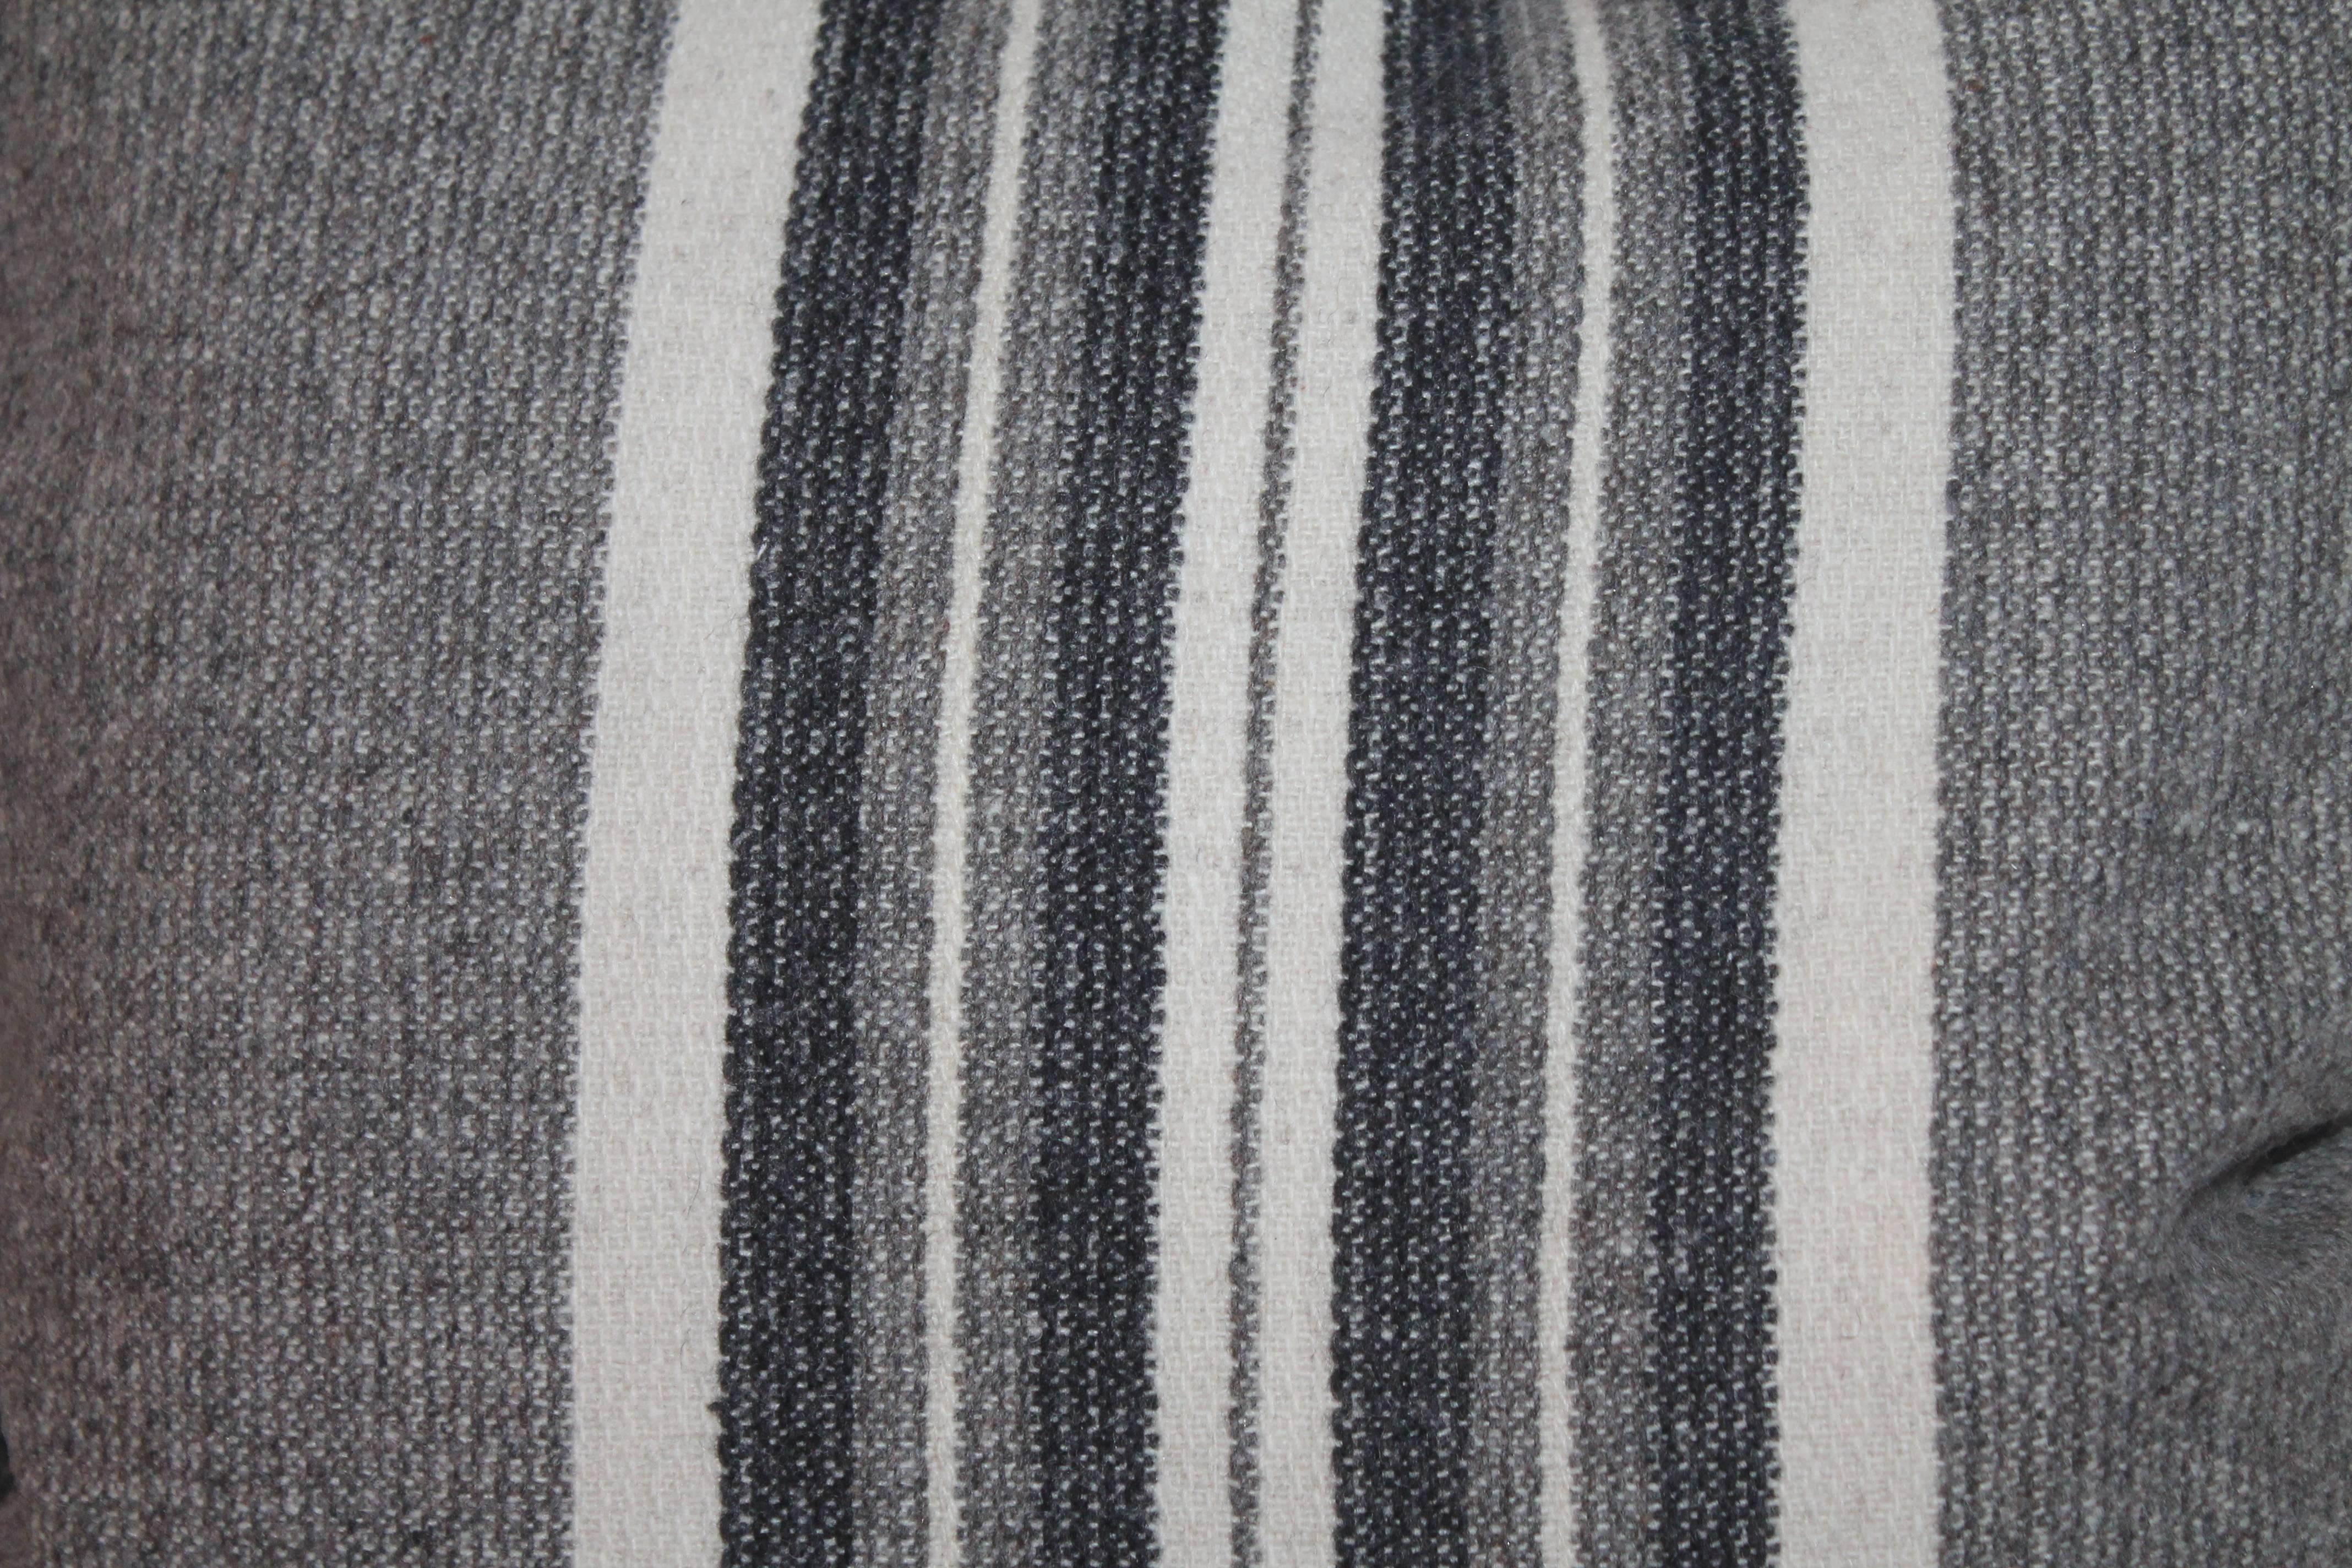 Fine Mexican /American wool striped Indian weaving pillows with soft grey leather backing. Sold in pairs.